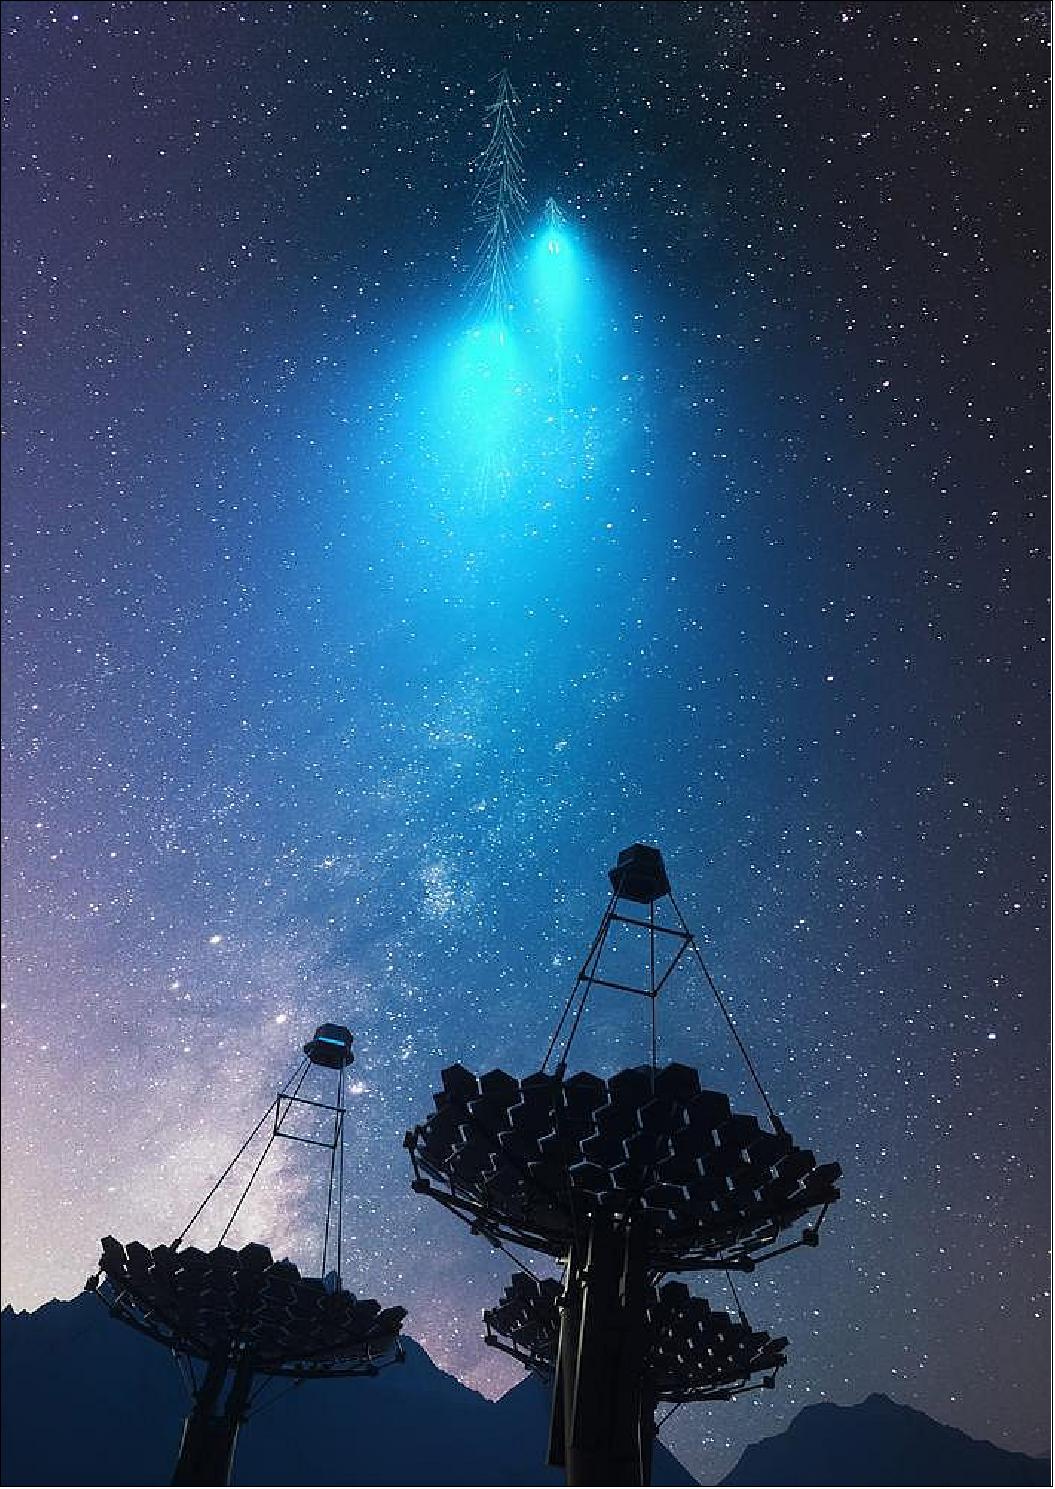 Figure 16: Cherenkov telescopes detect the bluish Cherenkov light generated by faster-than-light particles in Earth's atmosphere, produced by cosmic gamma rays. (image credit: DESY, Science Communication Lab)